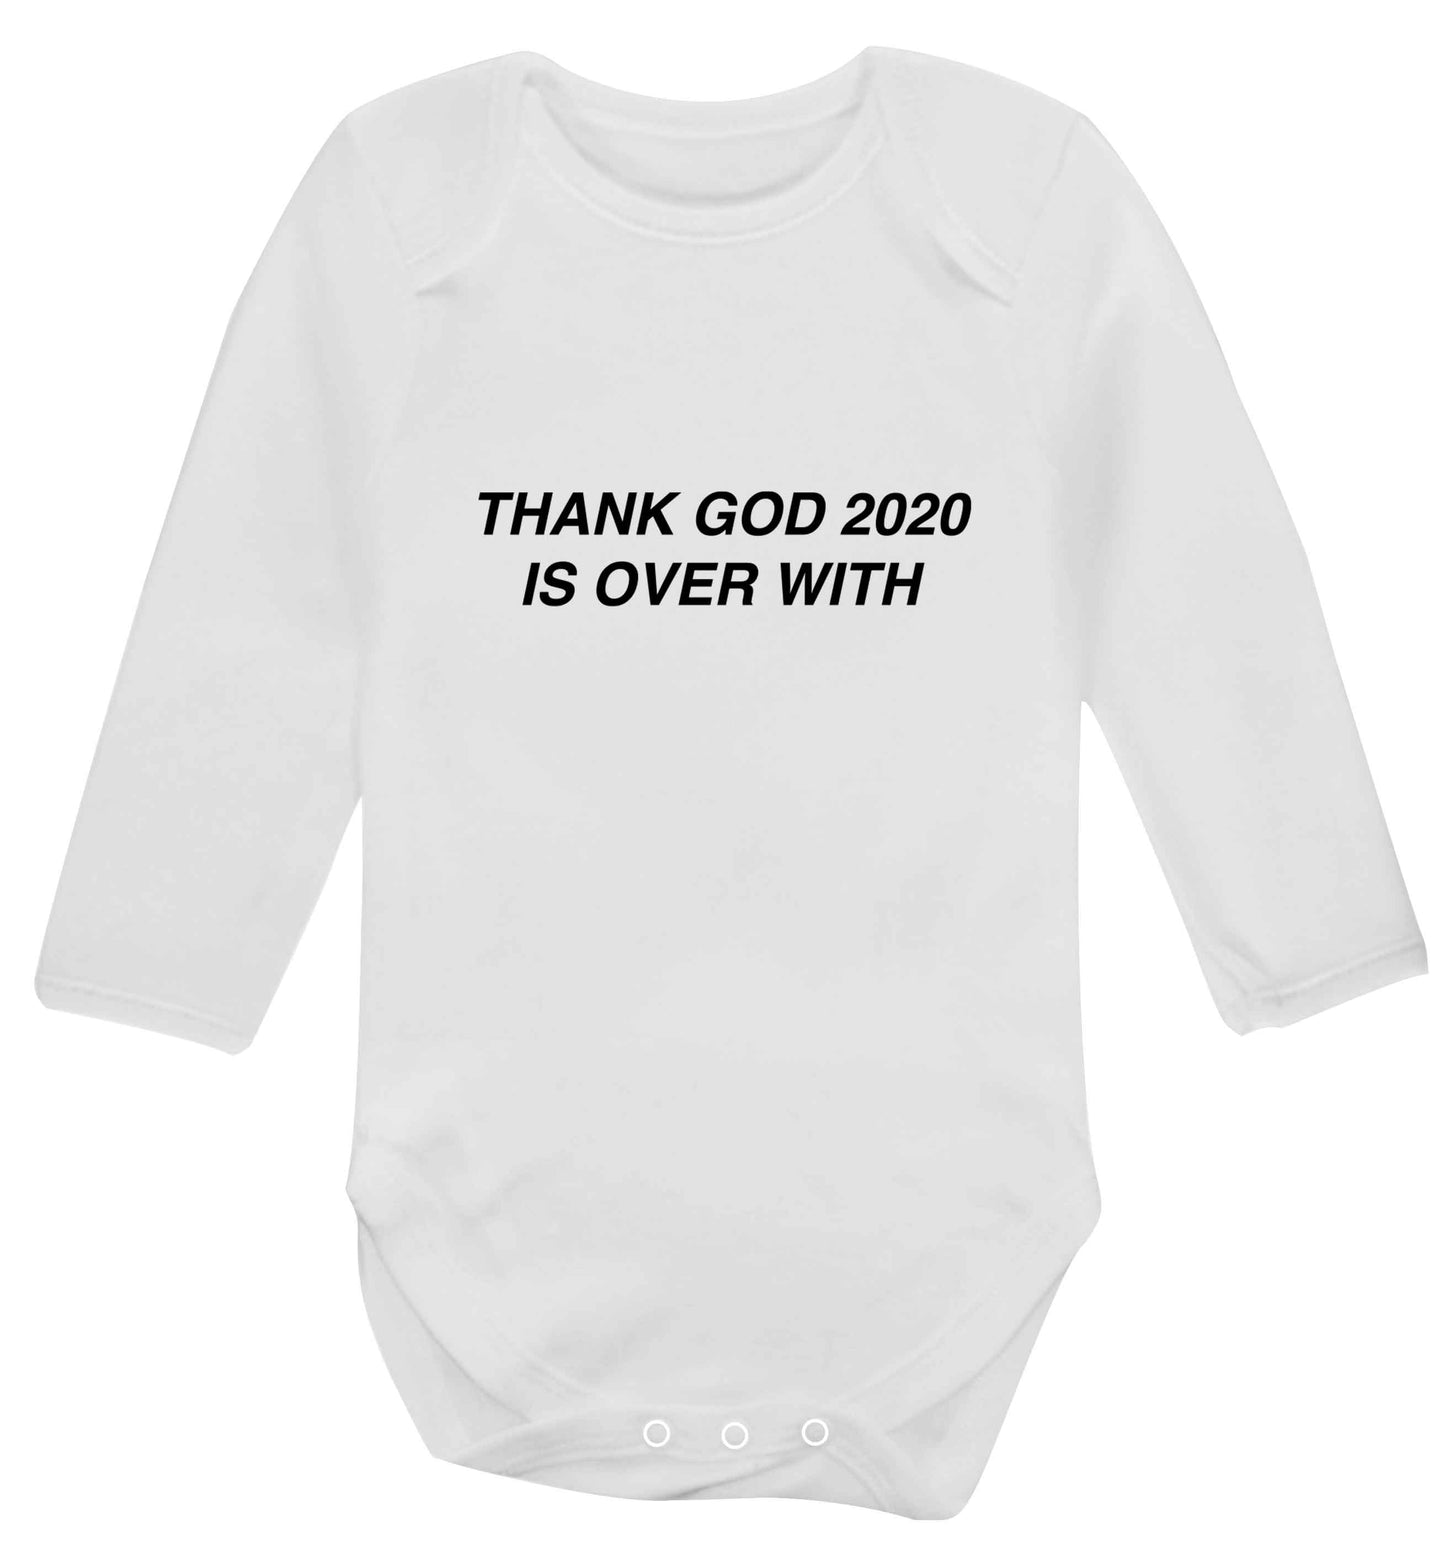 Thank god 2020 is over with baby vest long sleeved white 6-12 months